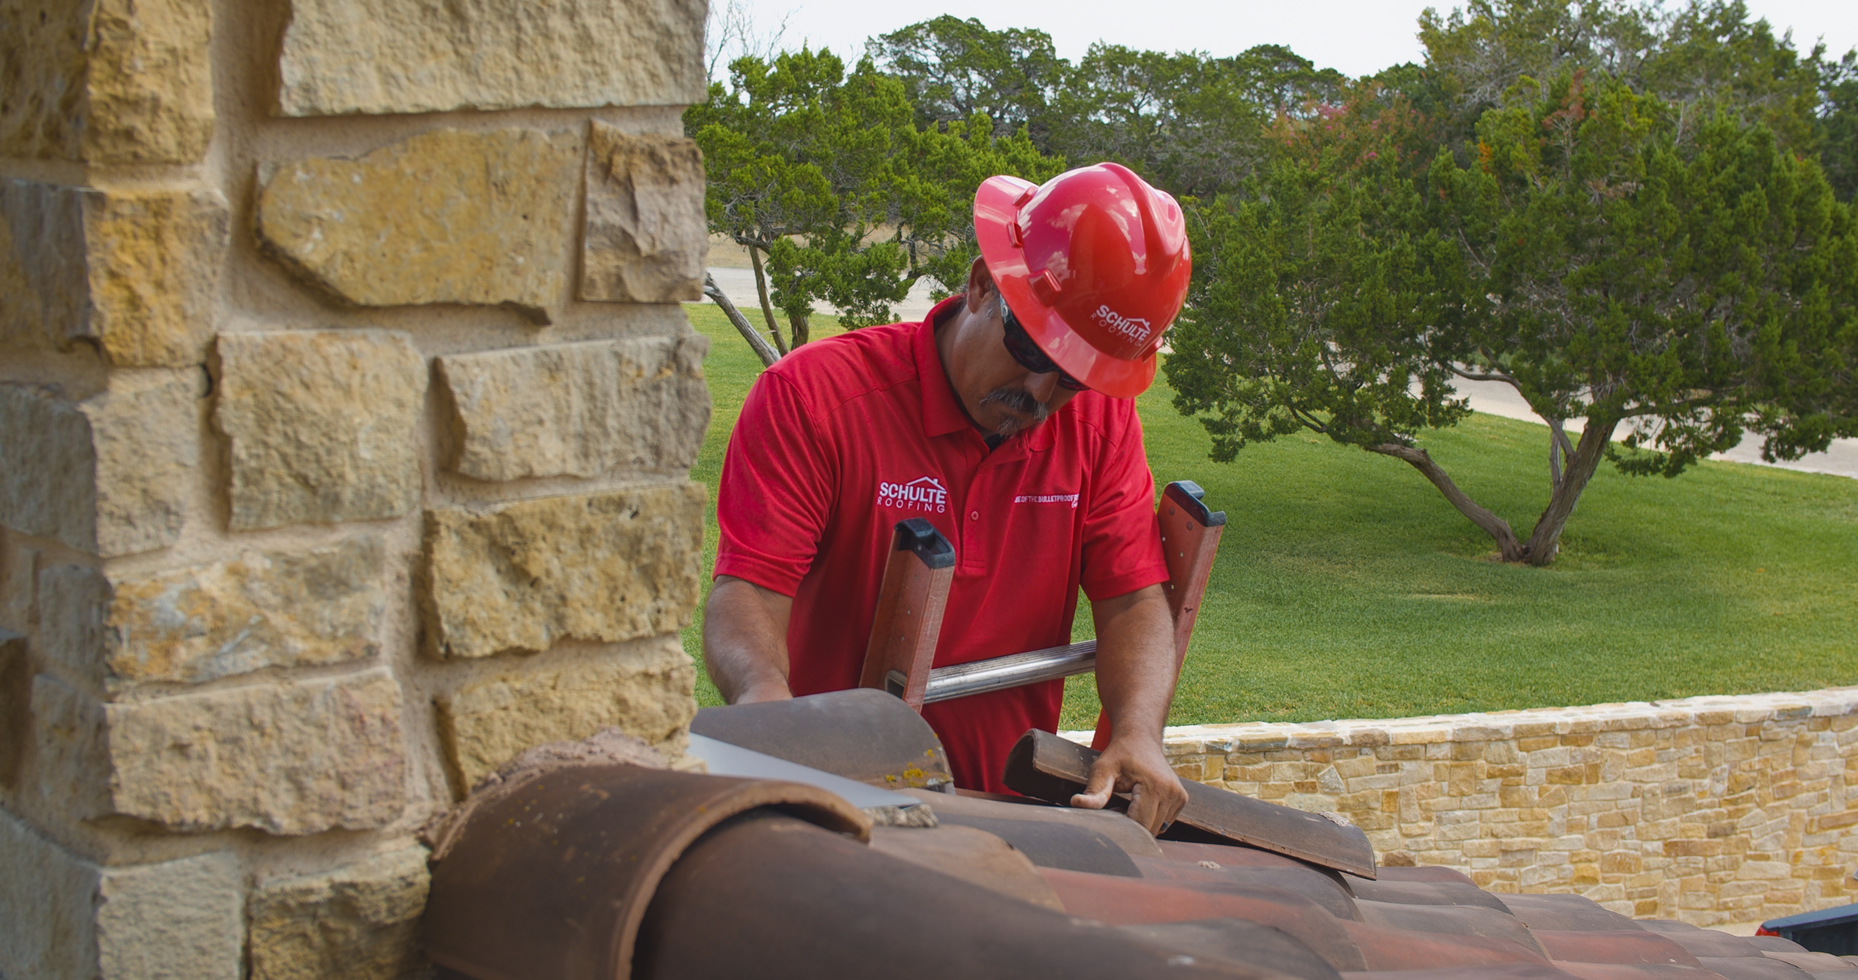 Award Winning San Antonio roofing build and installation quality by a Schulte Roofing®.